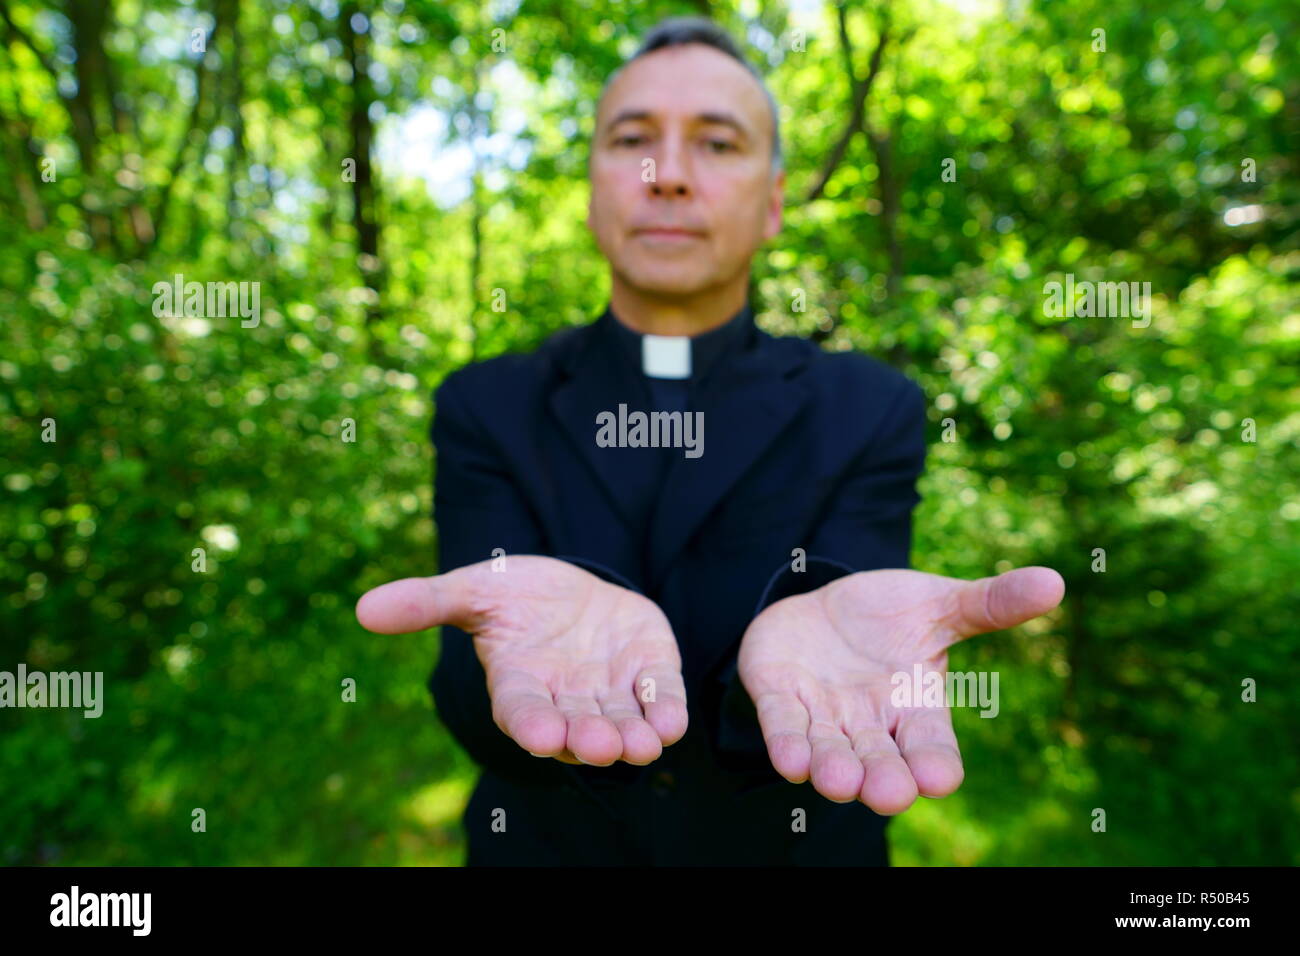 A good looking catholic priest is welcoming us in joy. He looks at us with confidence, openning his arms in peace. Focus on hands. Stock Photo